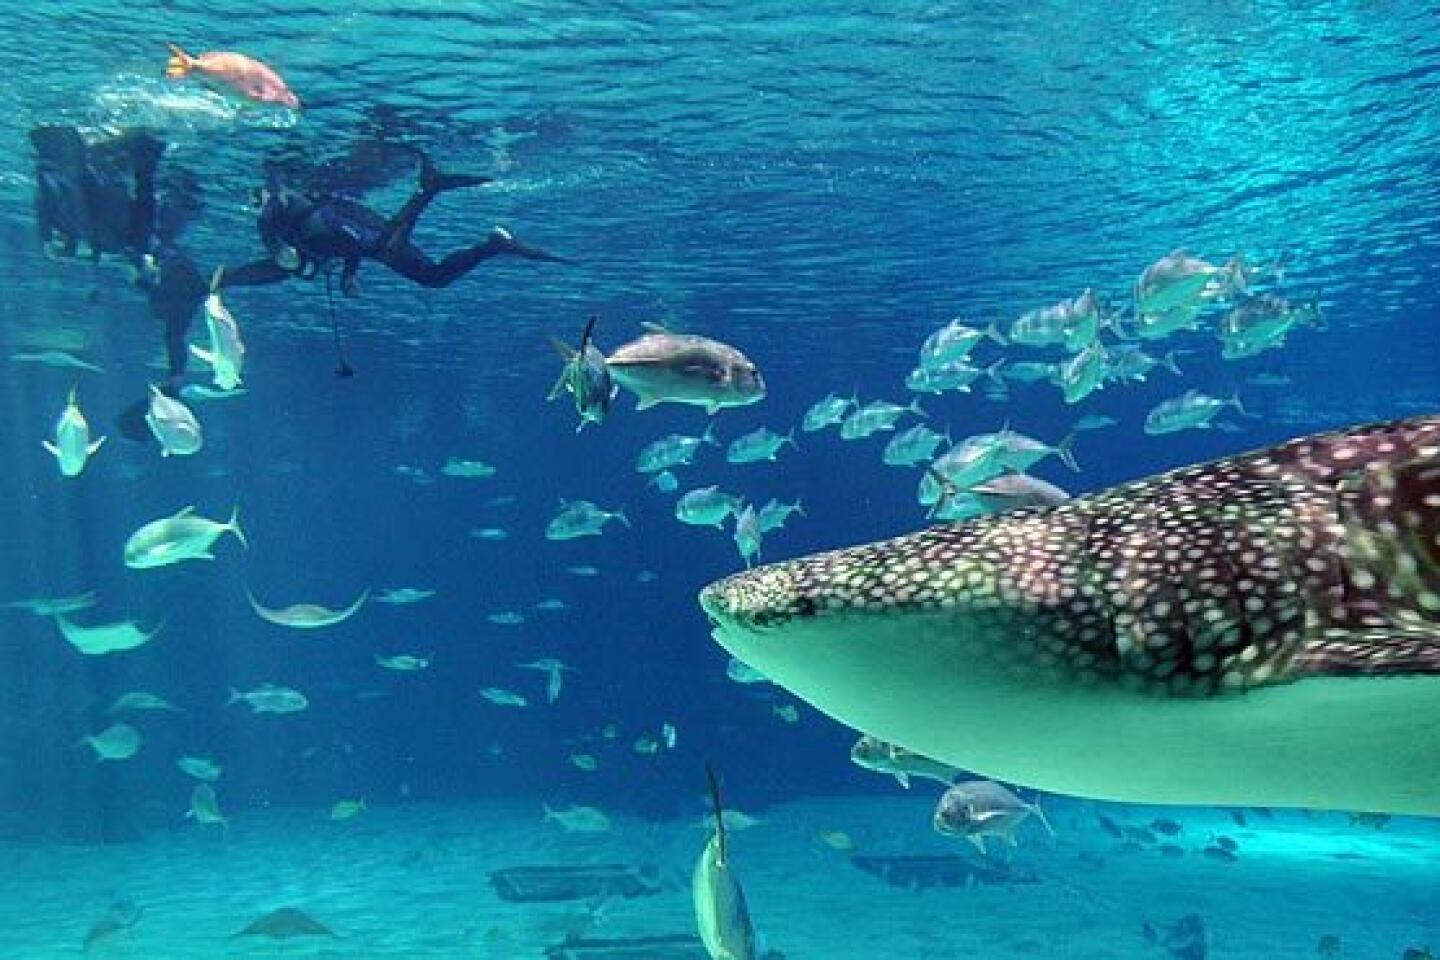 Swimming with whale sharks at the Aquarium Los Angeles Times